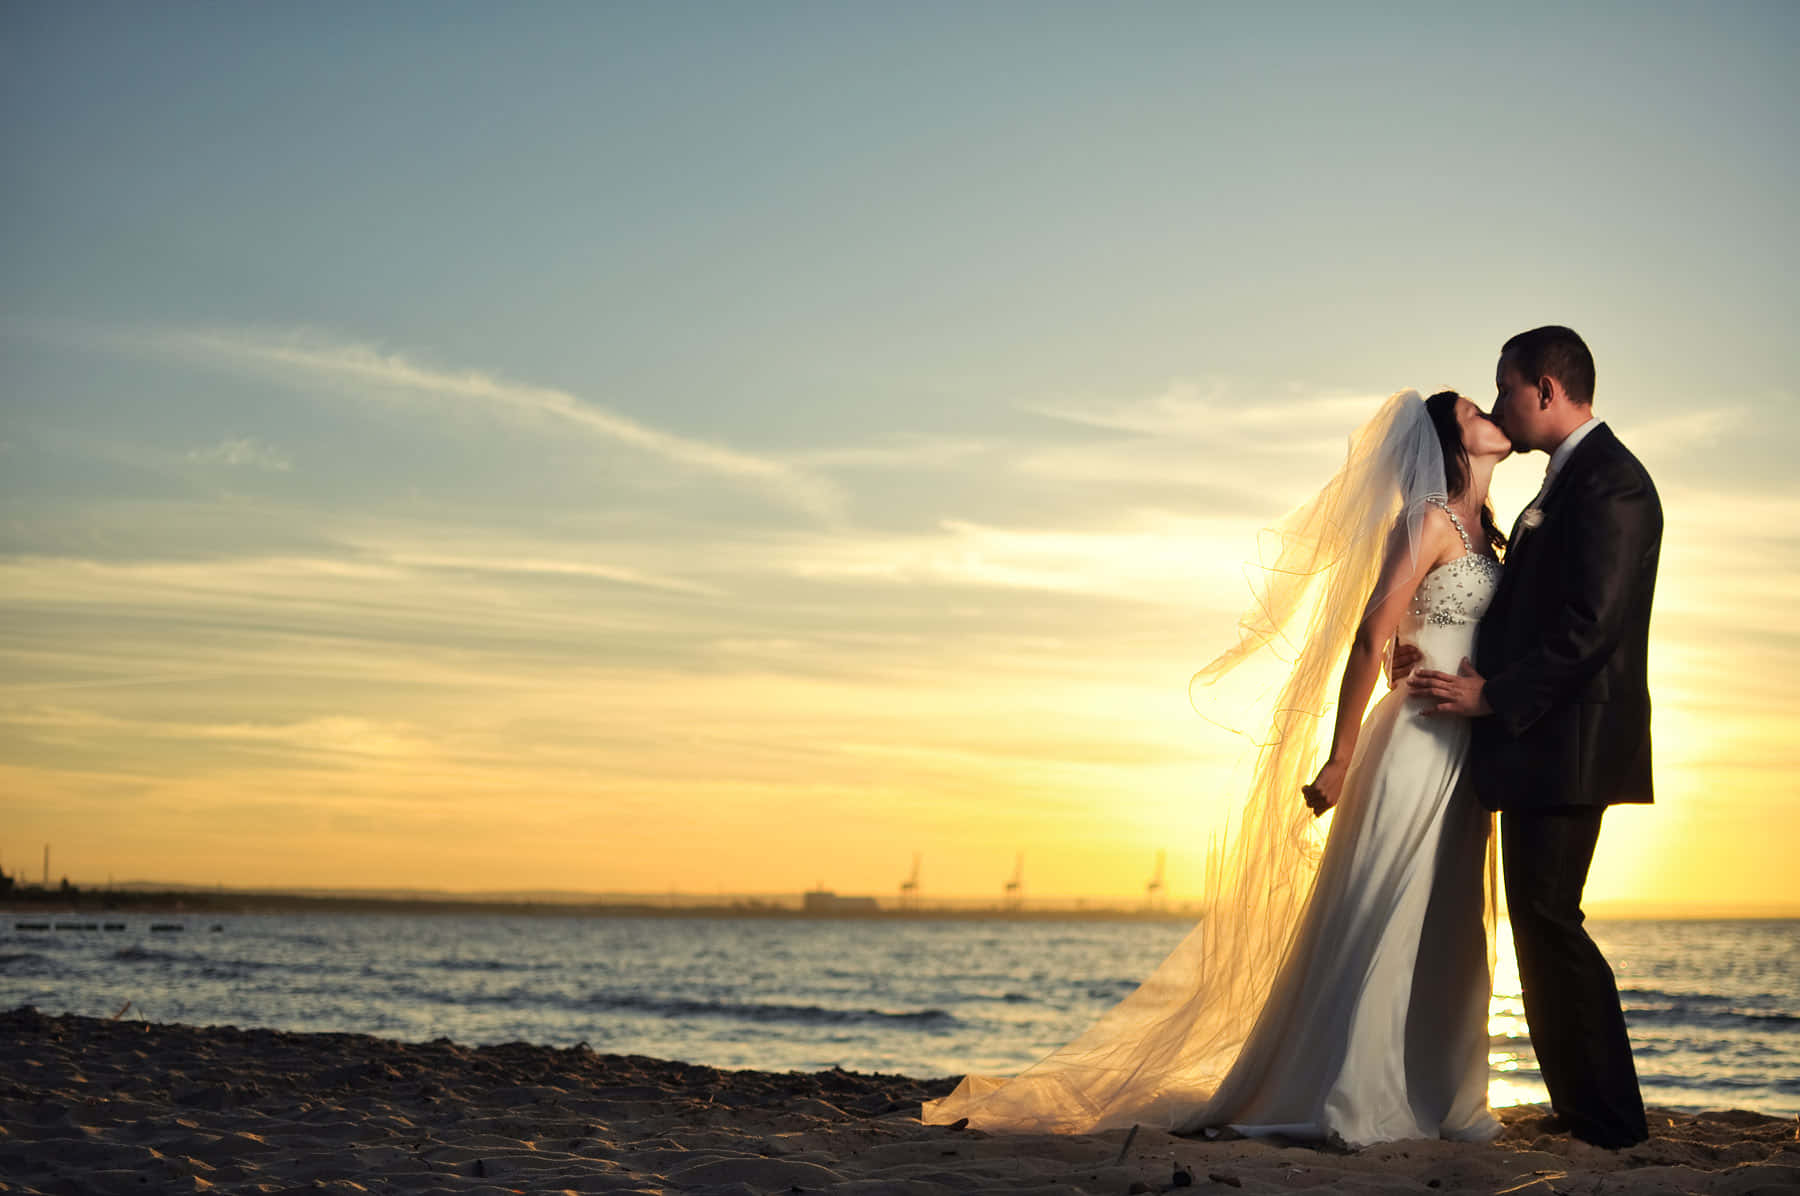 "the Epitome Of Romance: A Beach Wedding At Sunset" Wallpaper